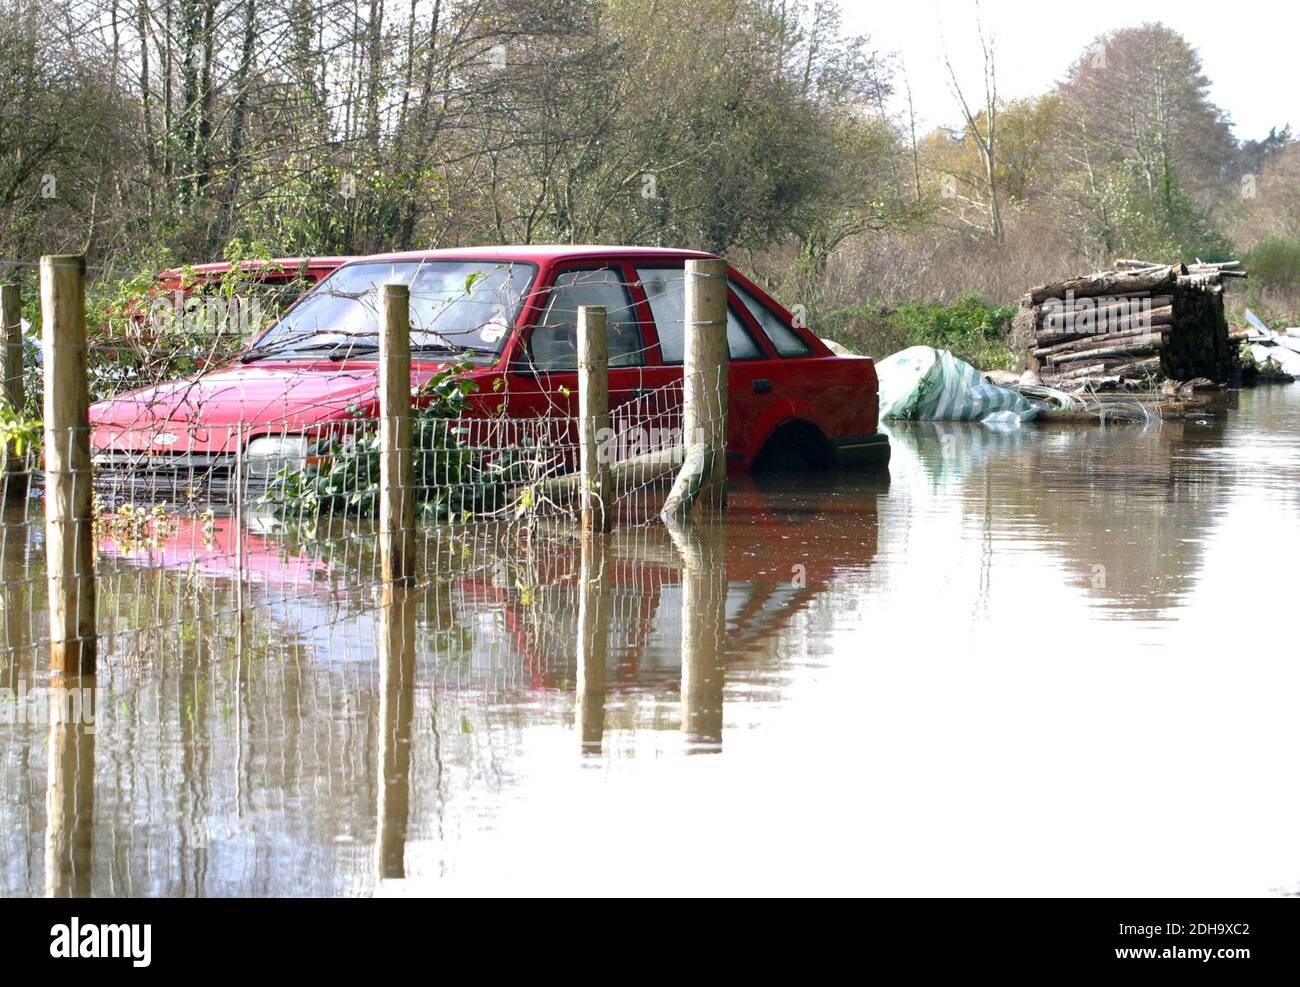 A parked car in a flooded garden in Dorset. UK. Stock Photo